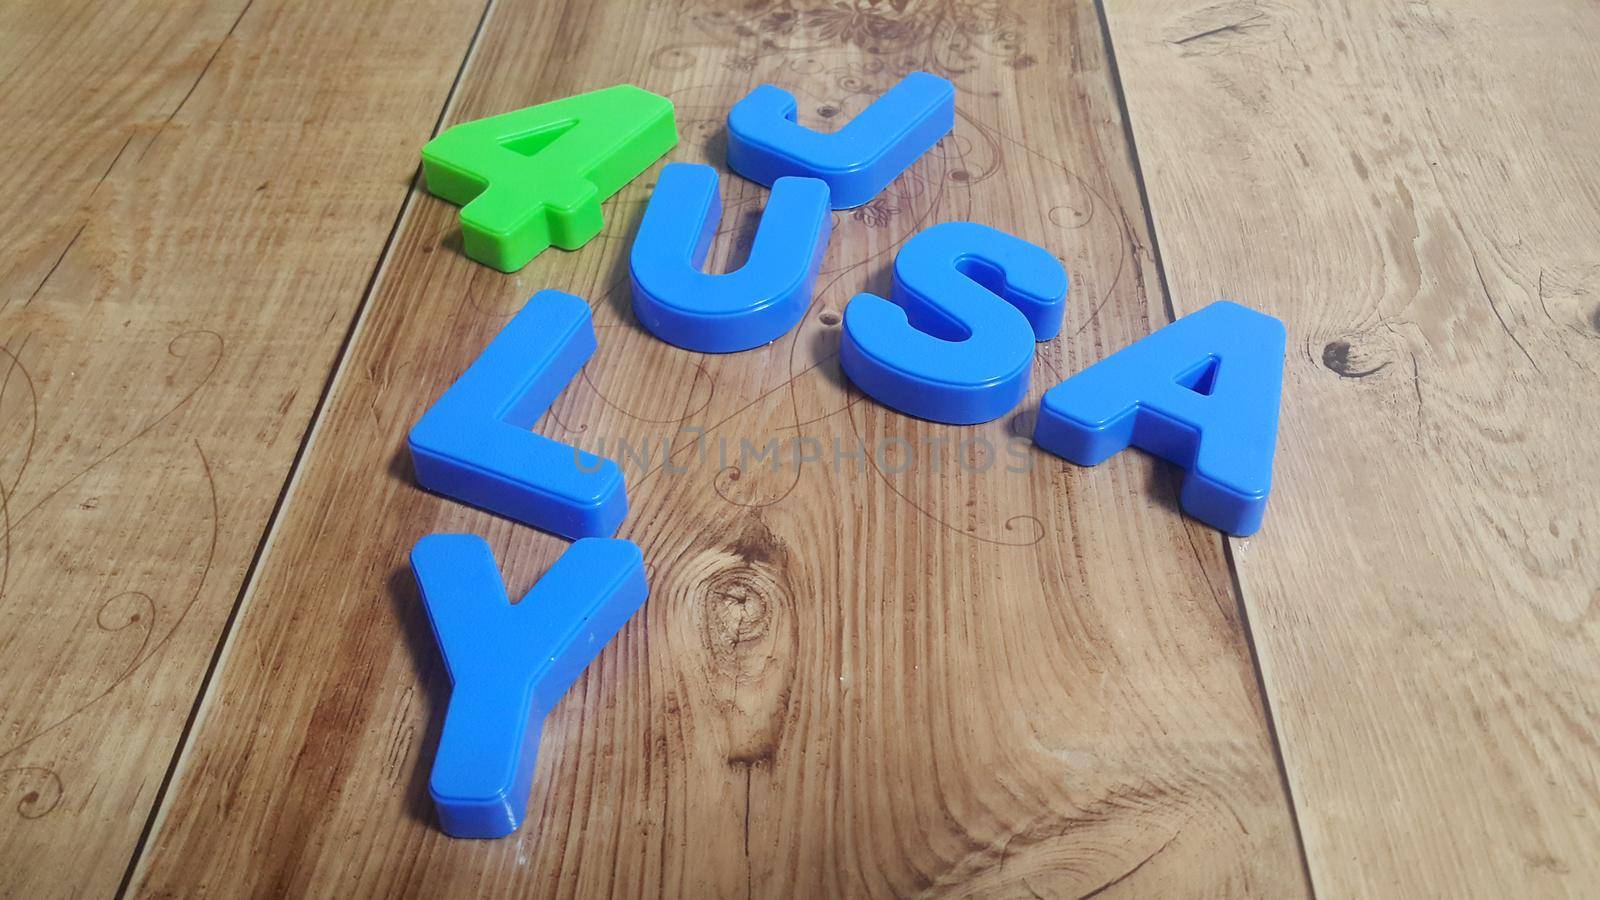 Plastic colored alphabets making words 4 july USA are placed on a wooden floor by Photochowk